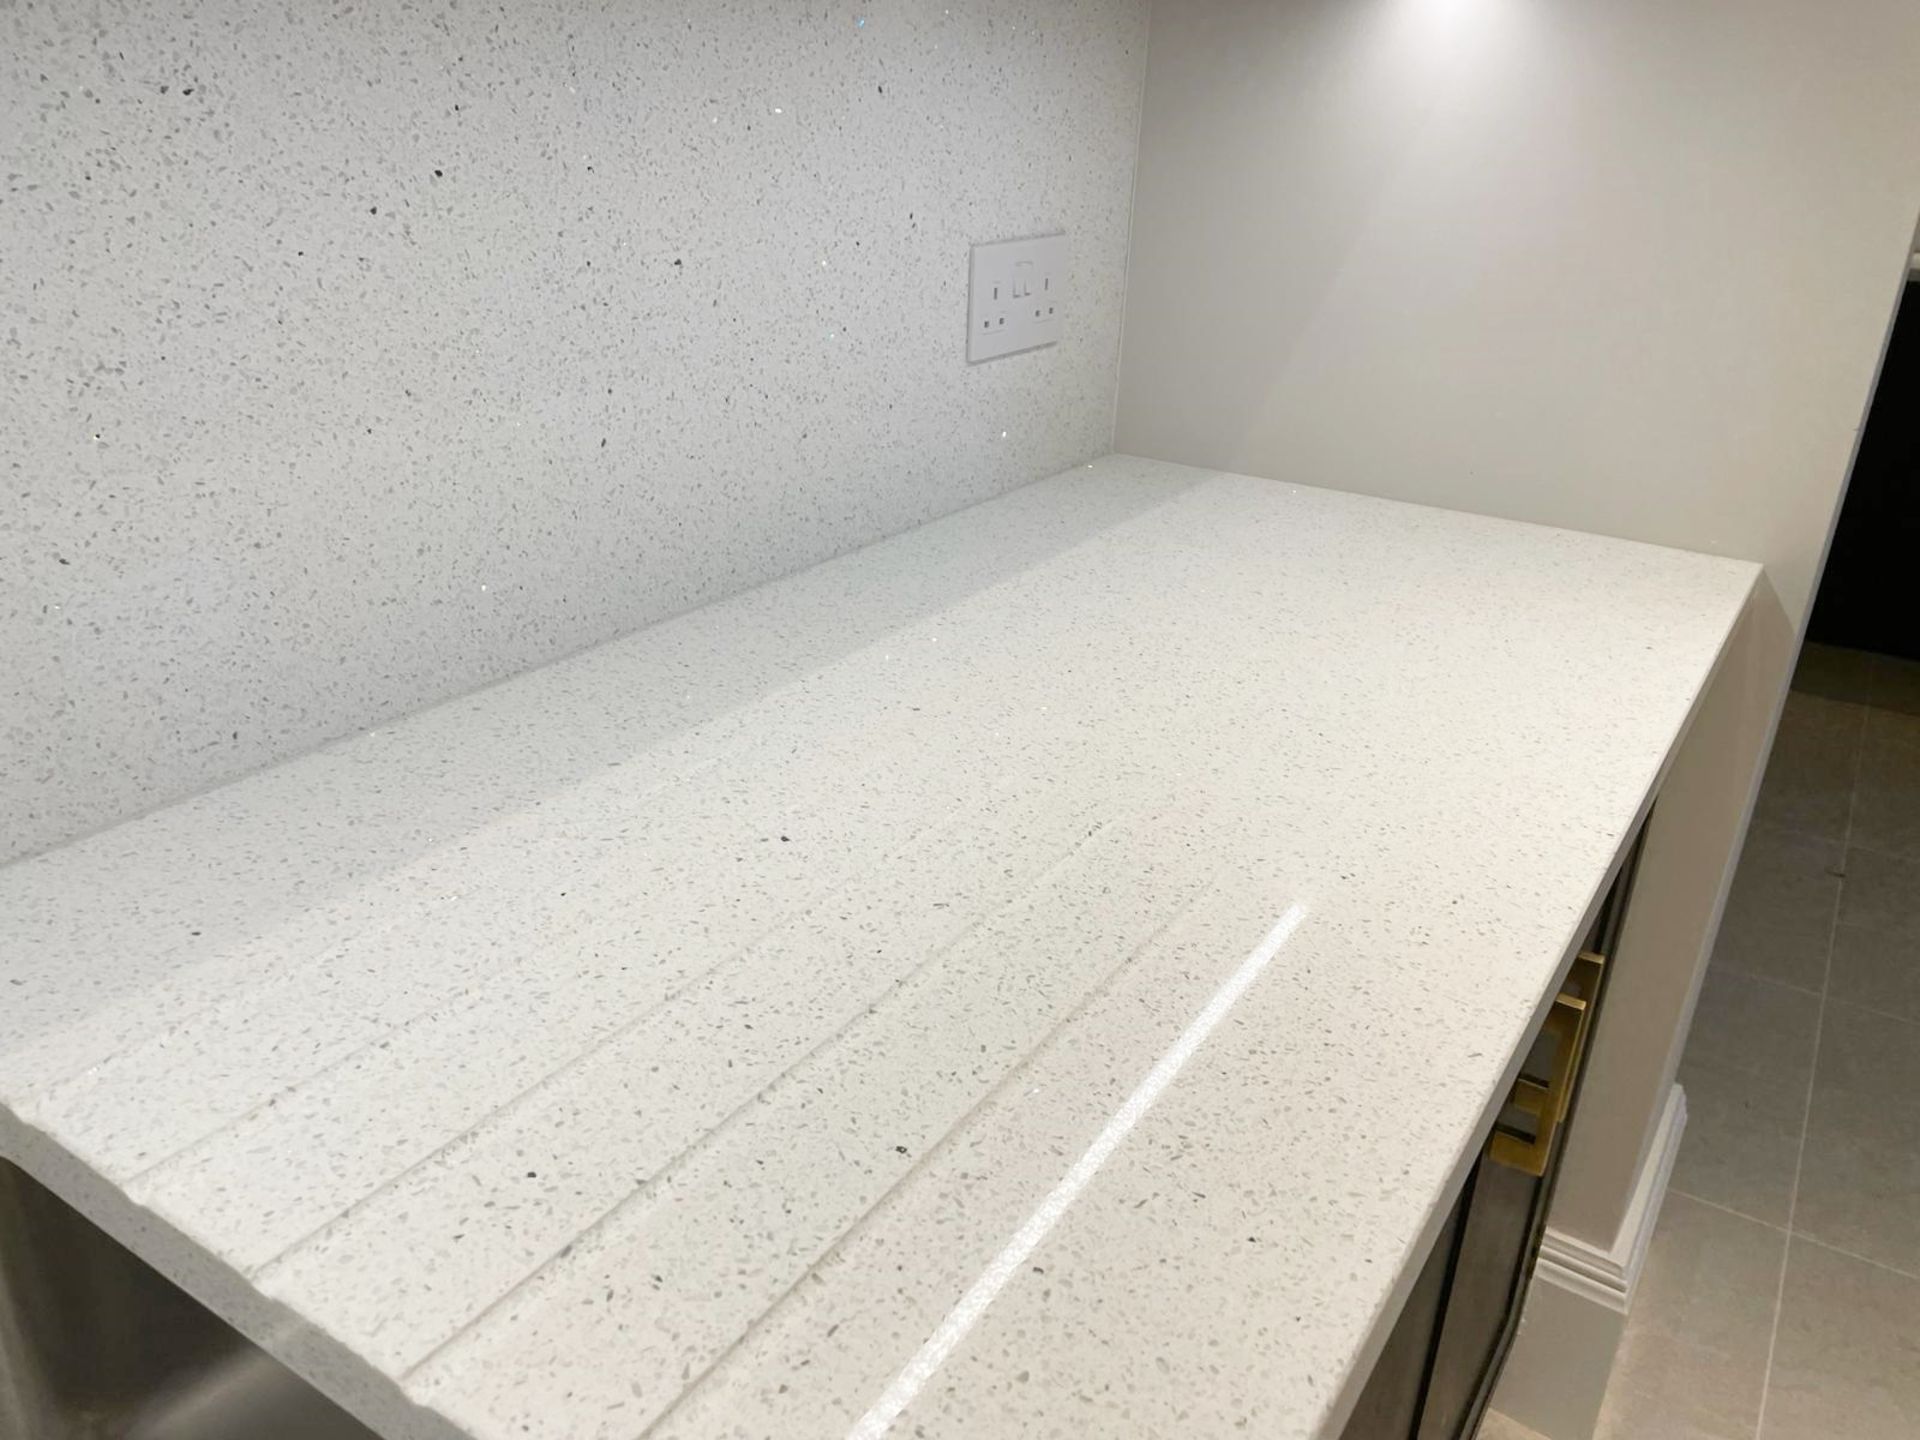 1 x Large Bespoke Fitted Luxury Home Bar with White Terrazzo Quartz Counter Worktops - Image 6 of 38